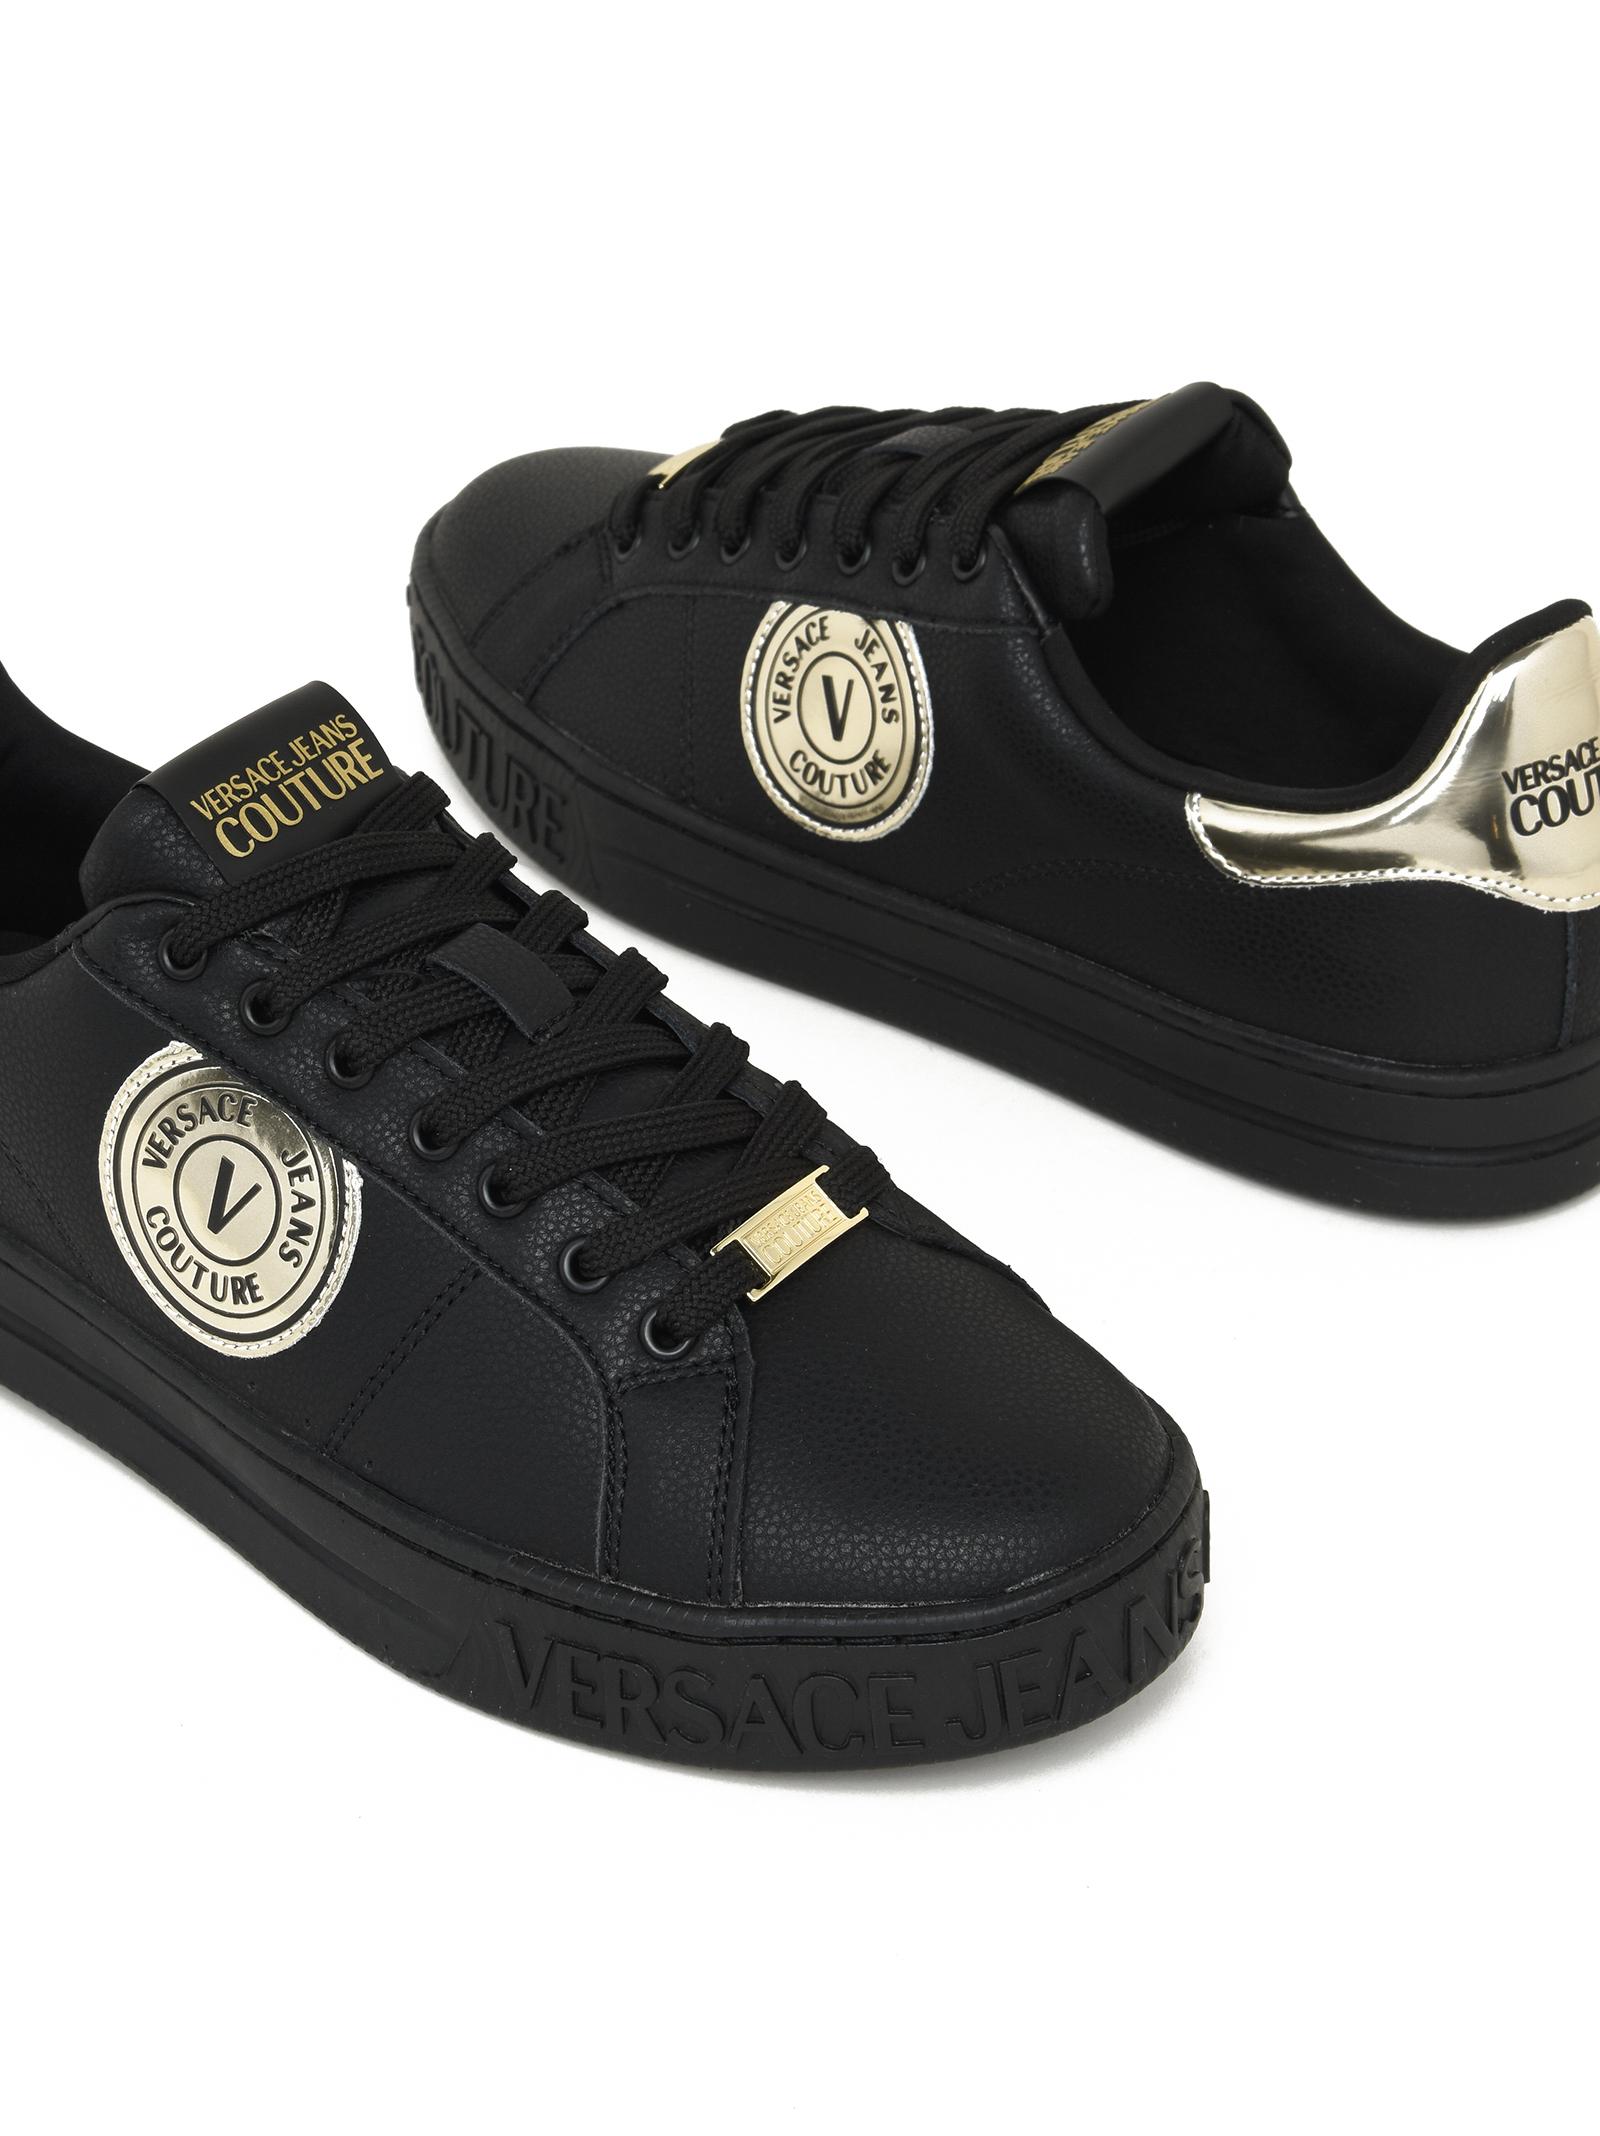 Versace Denim Jeans Couture Low-top Leather Sneakers With Logo in  Black/Gold (Black) for Men - Save 29% | Lyst